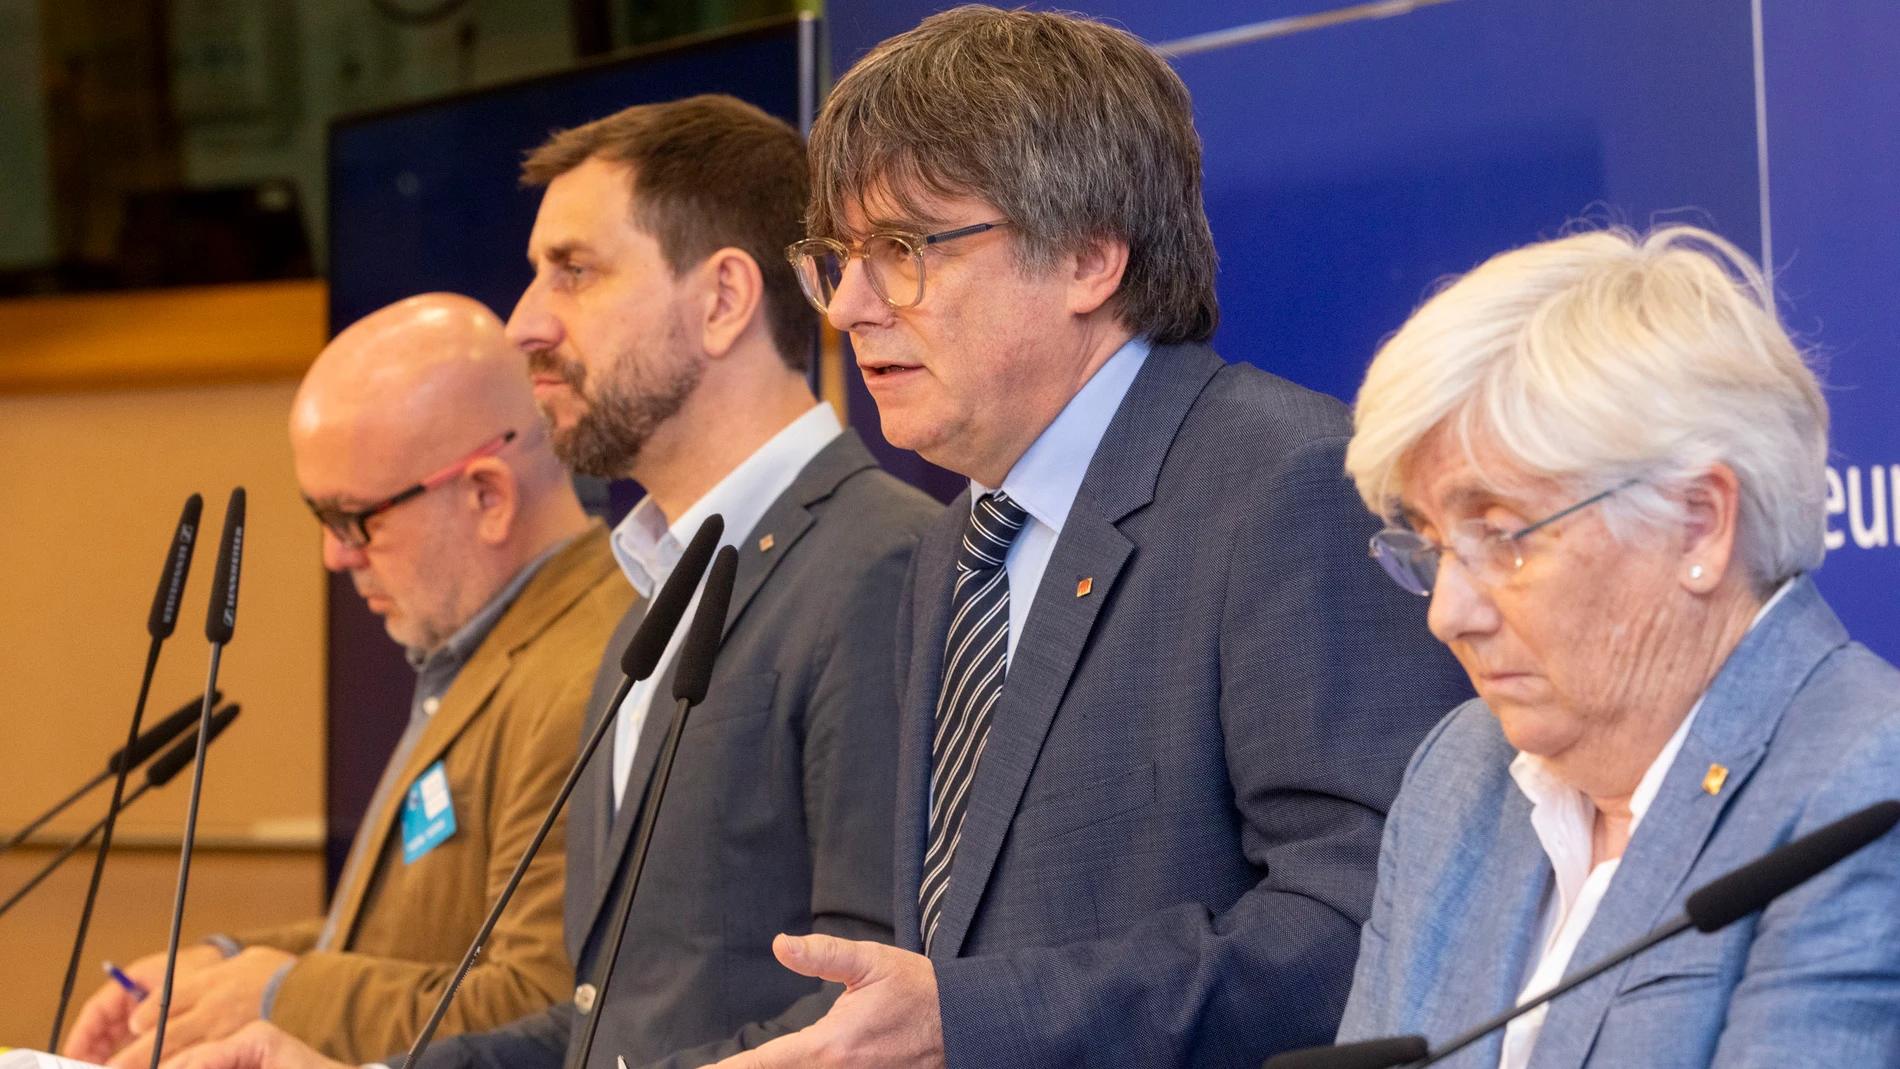 Catalan leader in exile Carles Puigdemont pictured during a press conference regarding the evaluation of the sentence of the Court of the European Union on the lifting of the euro-parliamentary immunity of Catalan leader Puigdemont and separatists Comin and Ponsati, Wednesday 05 July 2023, at the European parliament, in Brussels. Editorial licence valid only for Spain and 3 MONTHS from the date of the image, then delete it from your archive. For non-editorial and non-licensed use, please cont...